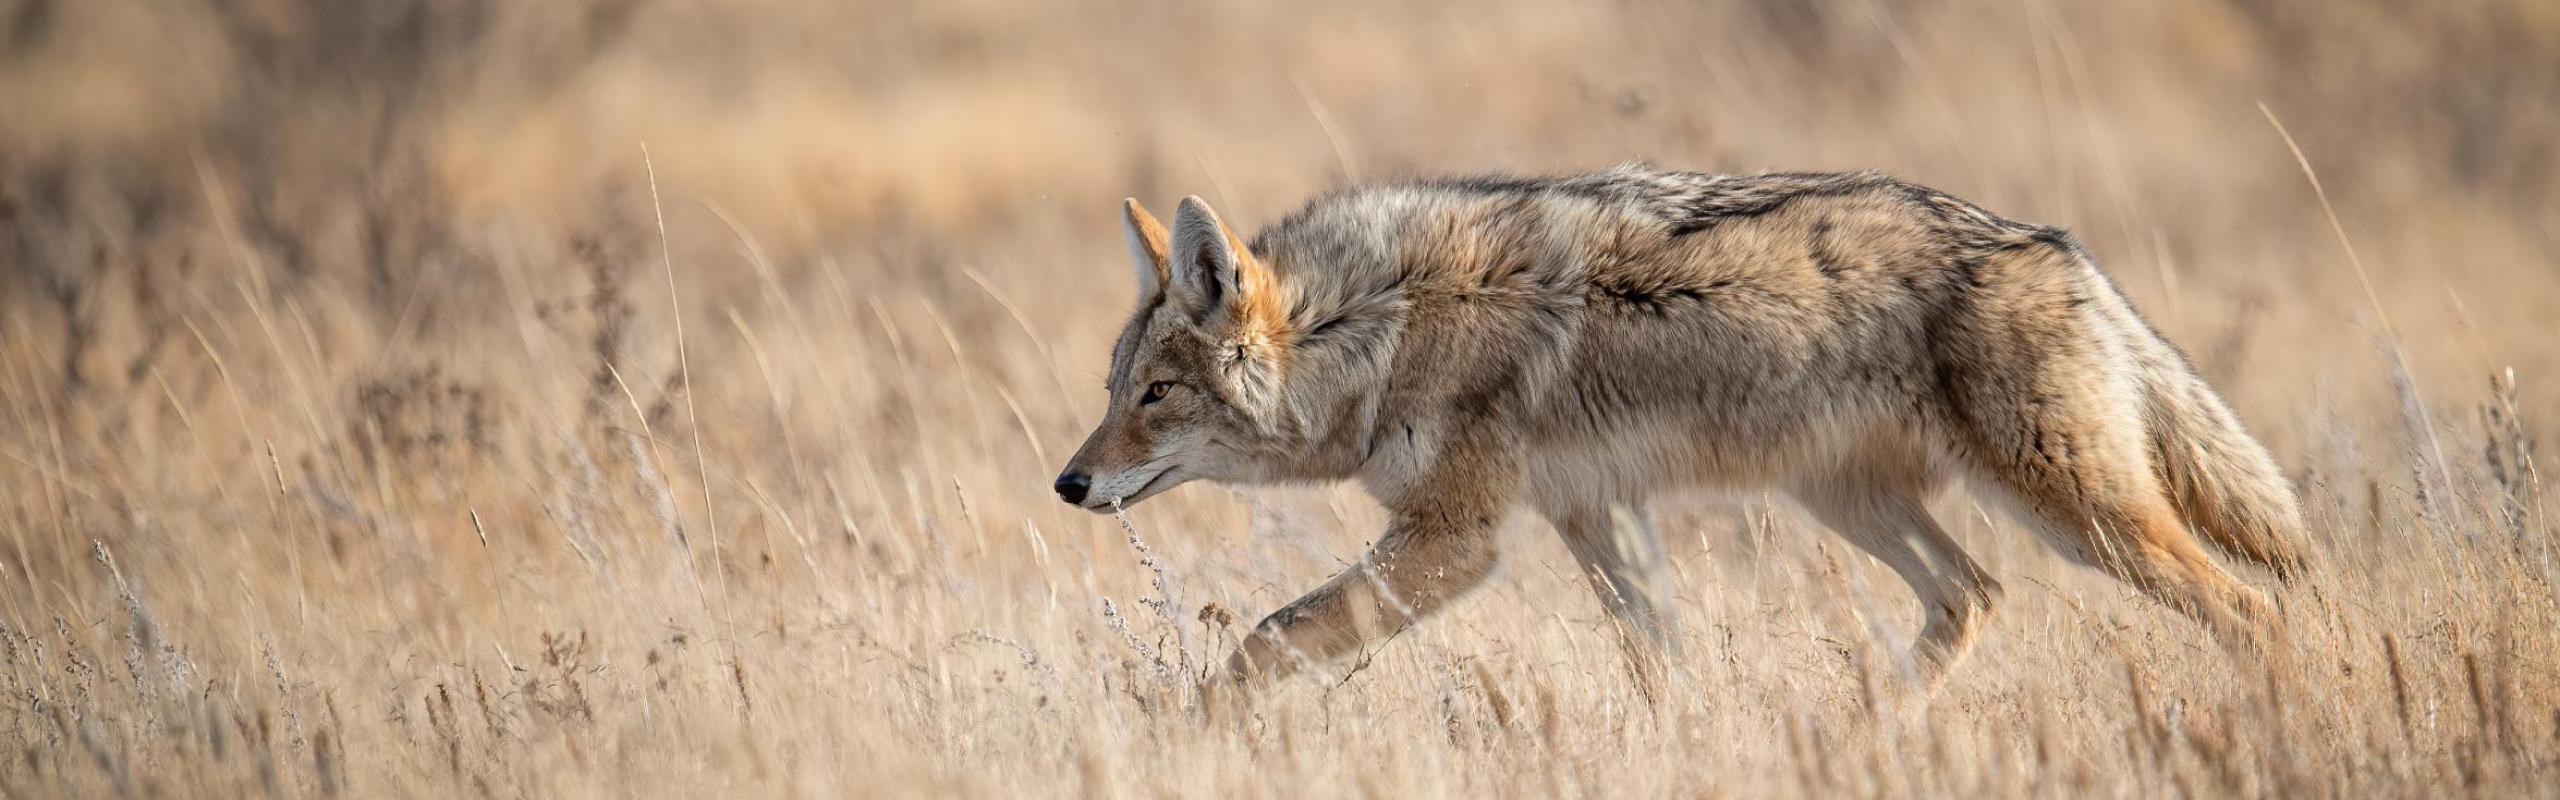 Coyote slinking through tall grass